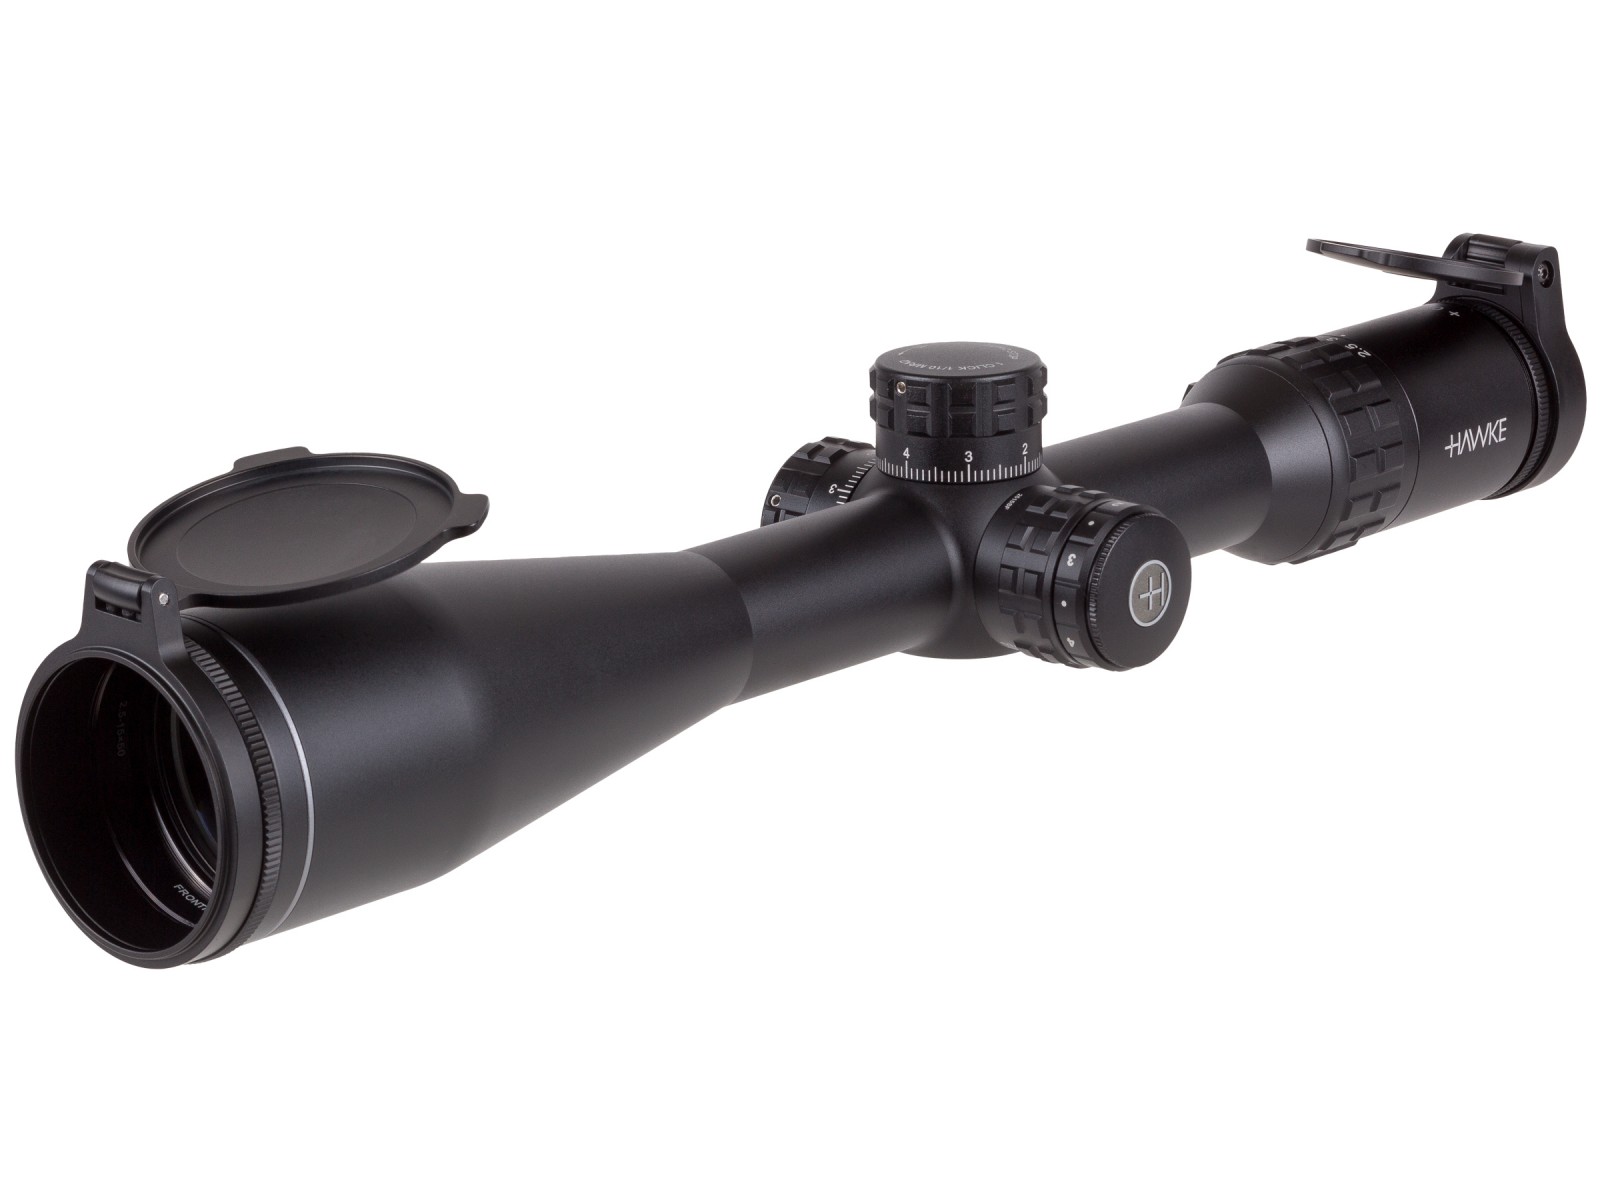 Hawke Frontier 30 SF 2.5-15x50 AO Rifle Scope, MIL PRO Reticle, 1/10 MRAD, 30mm Tube